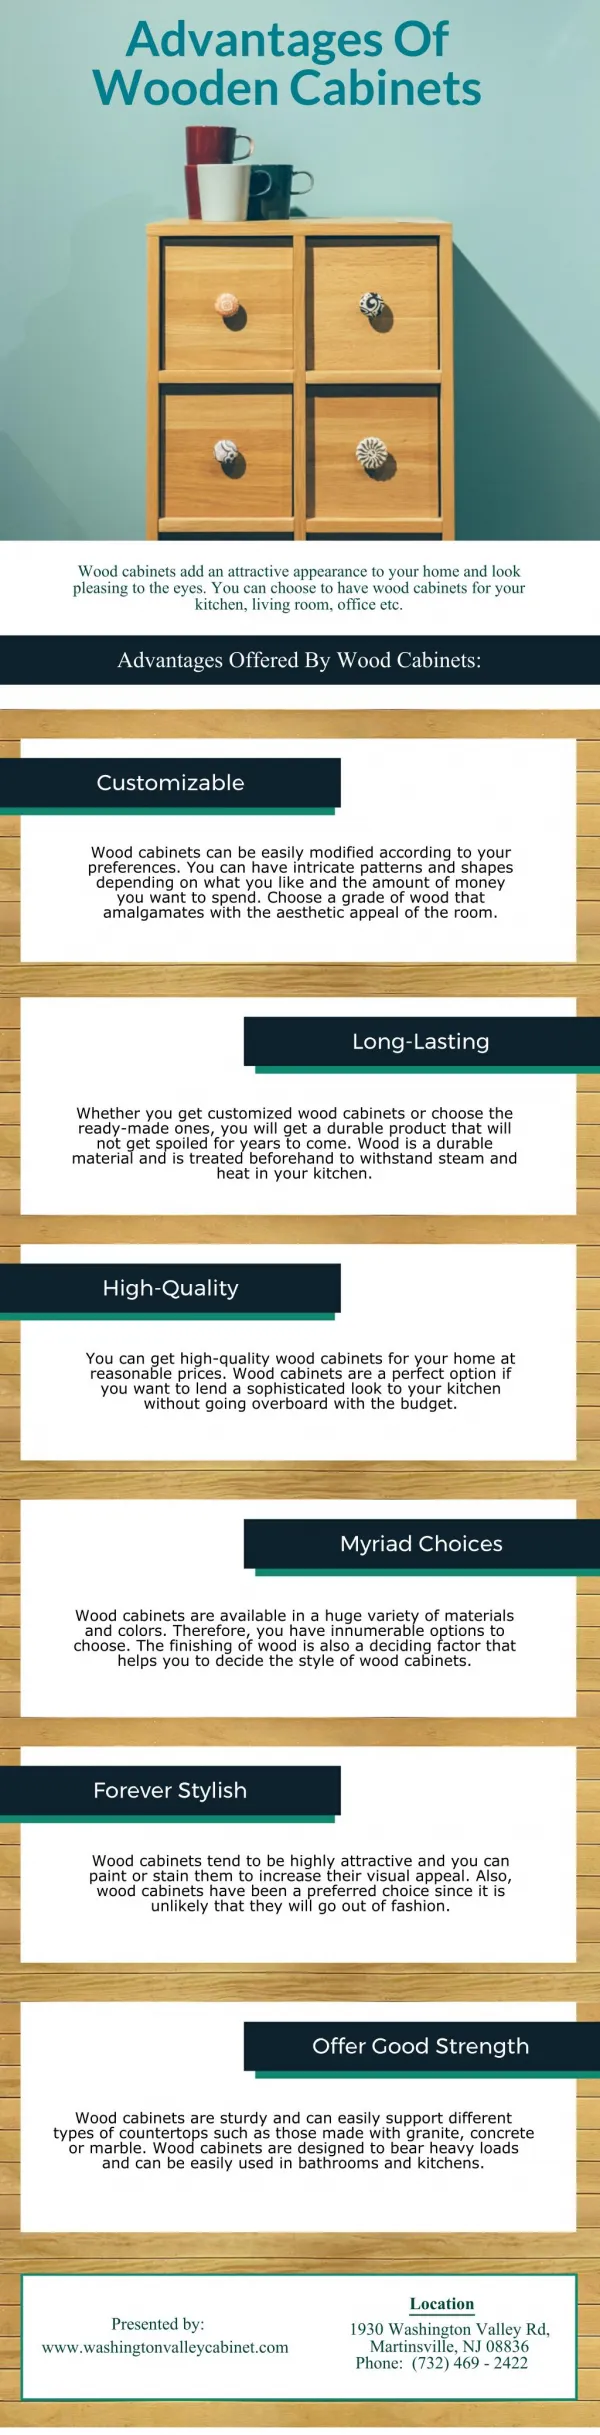 Benefits Of Wooden Cabinets